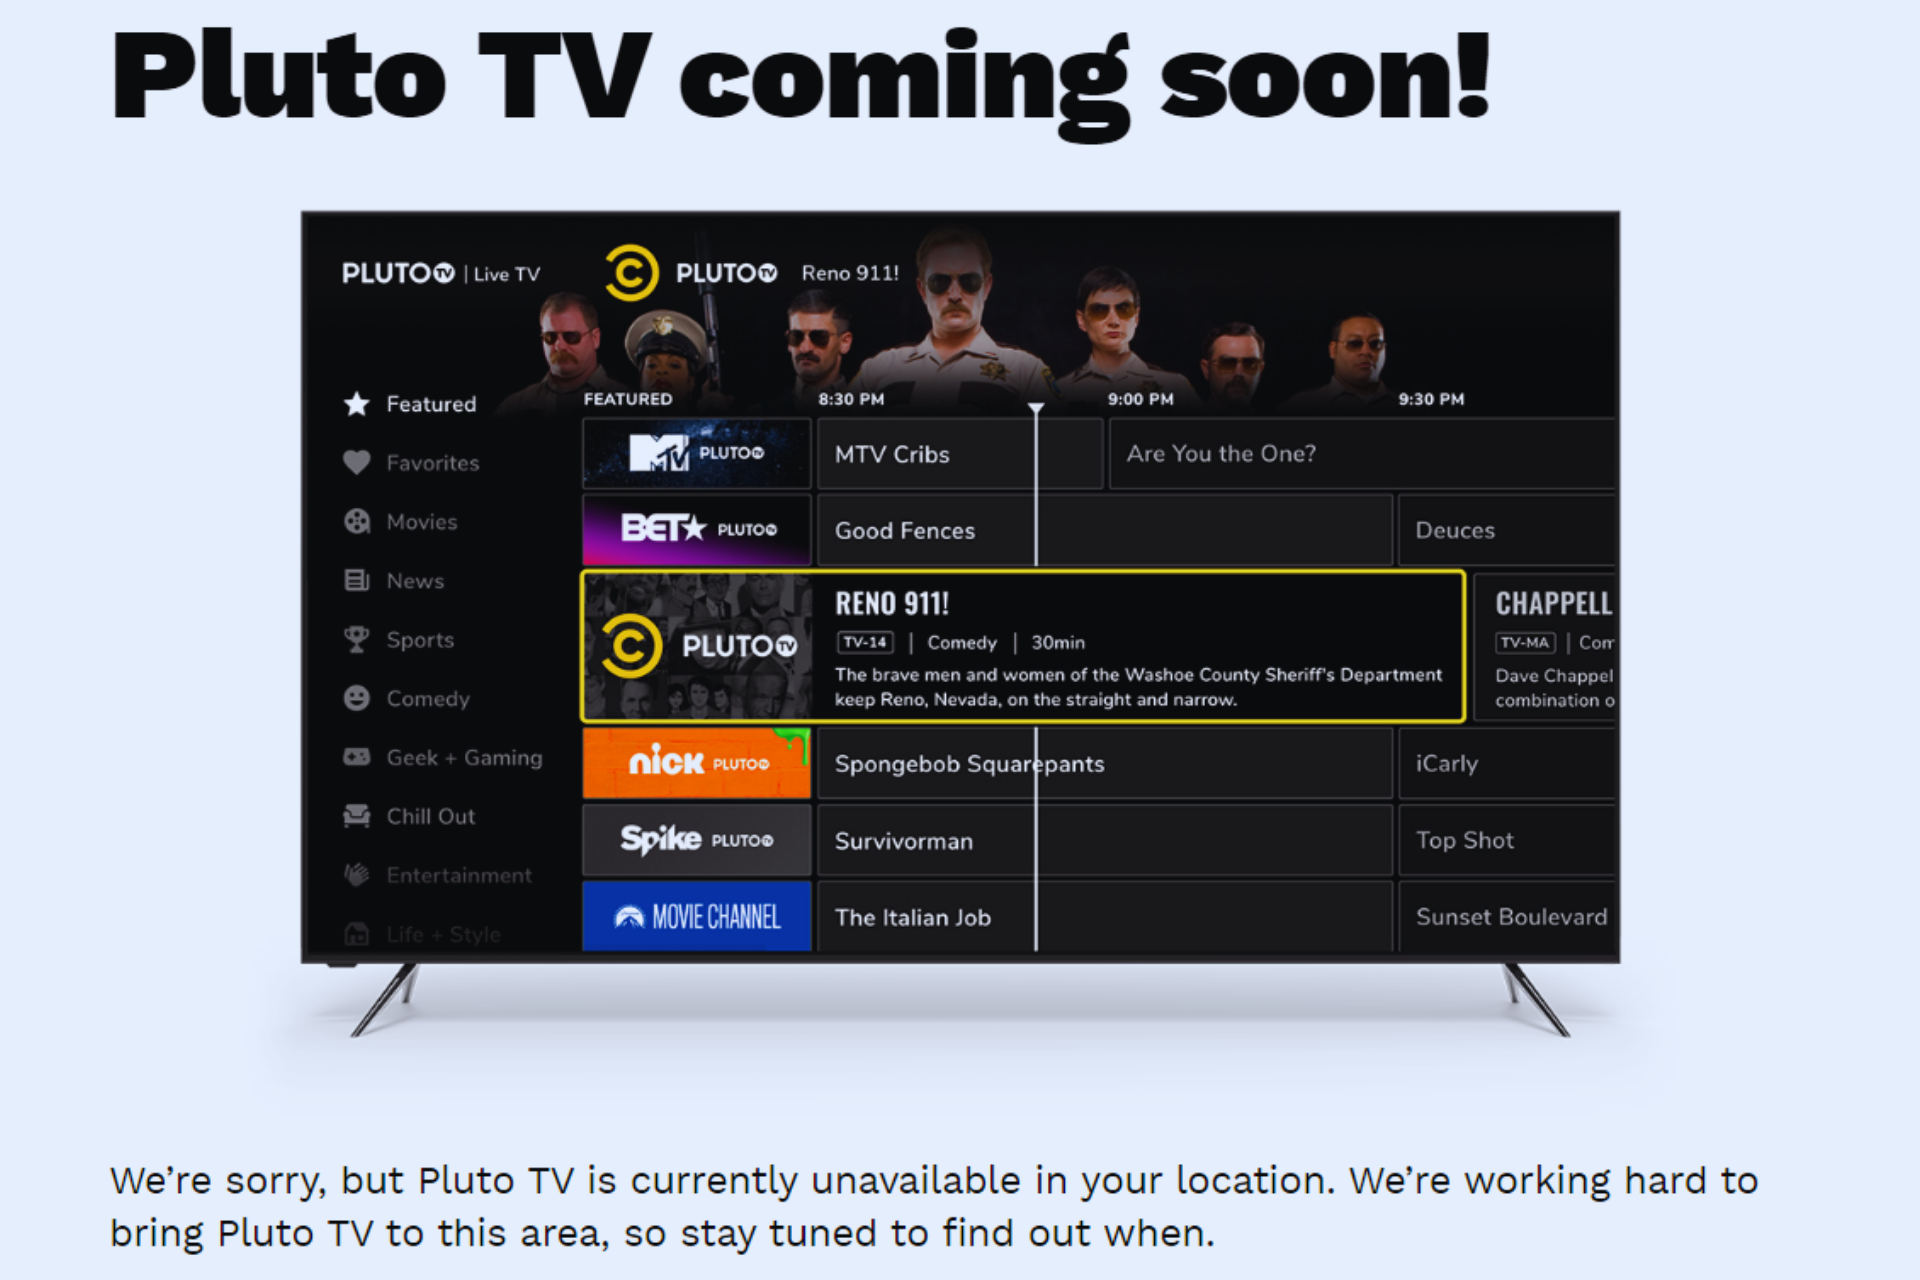 Fix Pluto TV is unavailable in your location